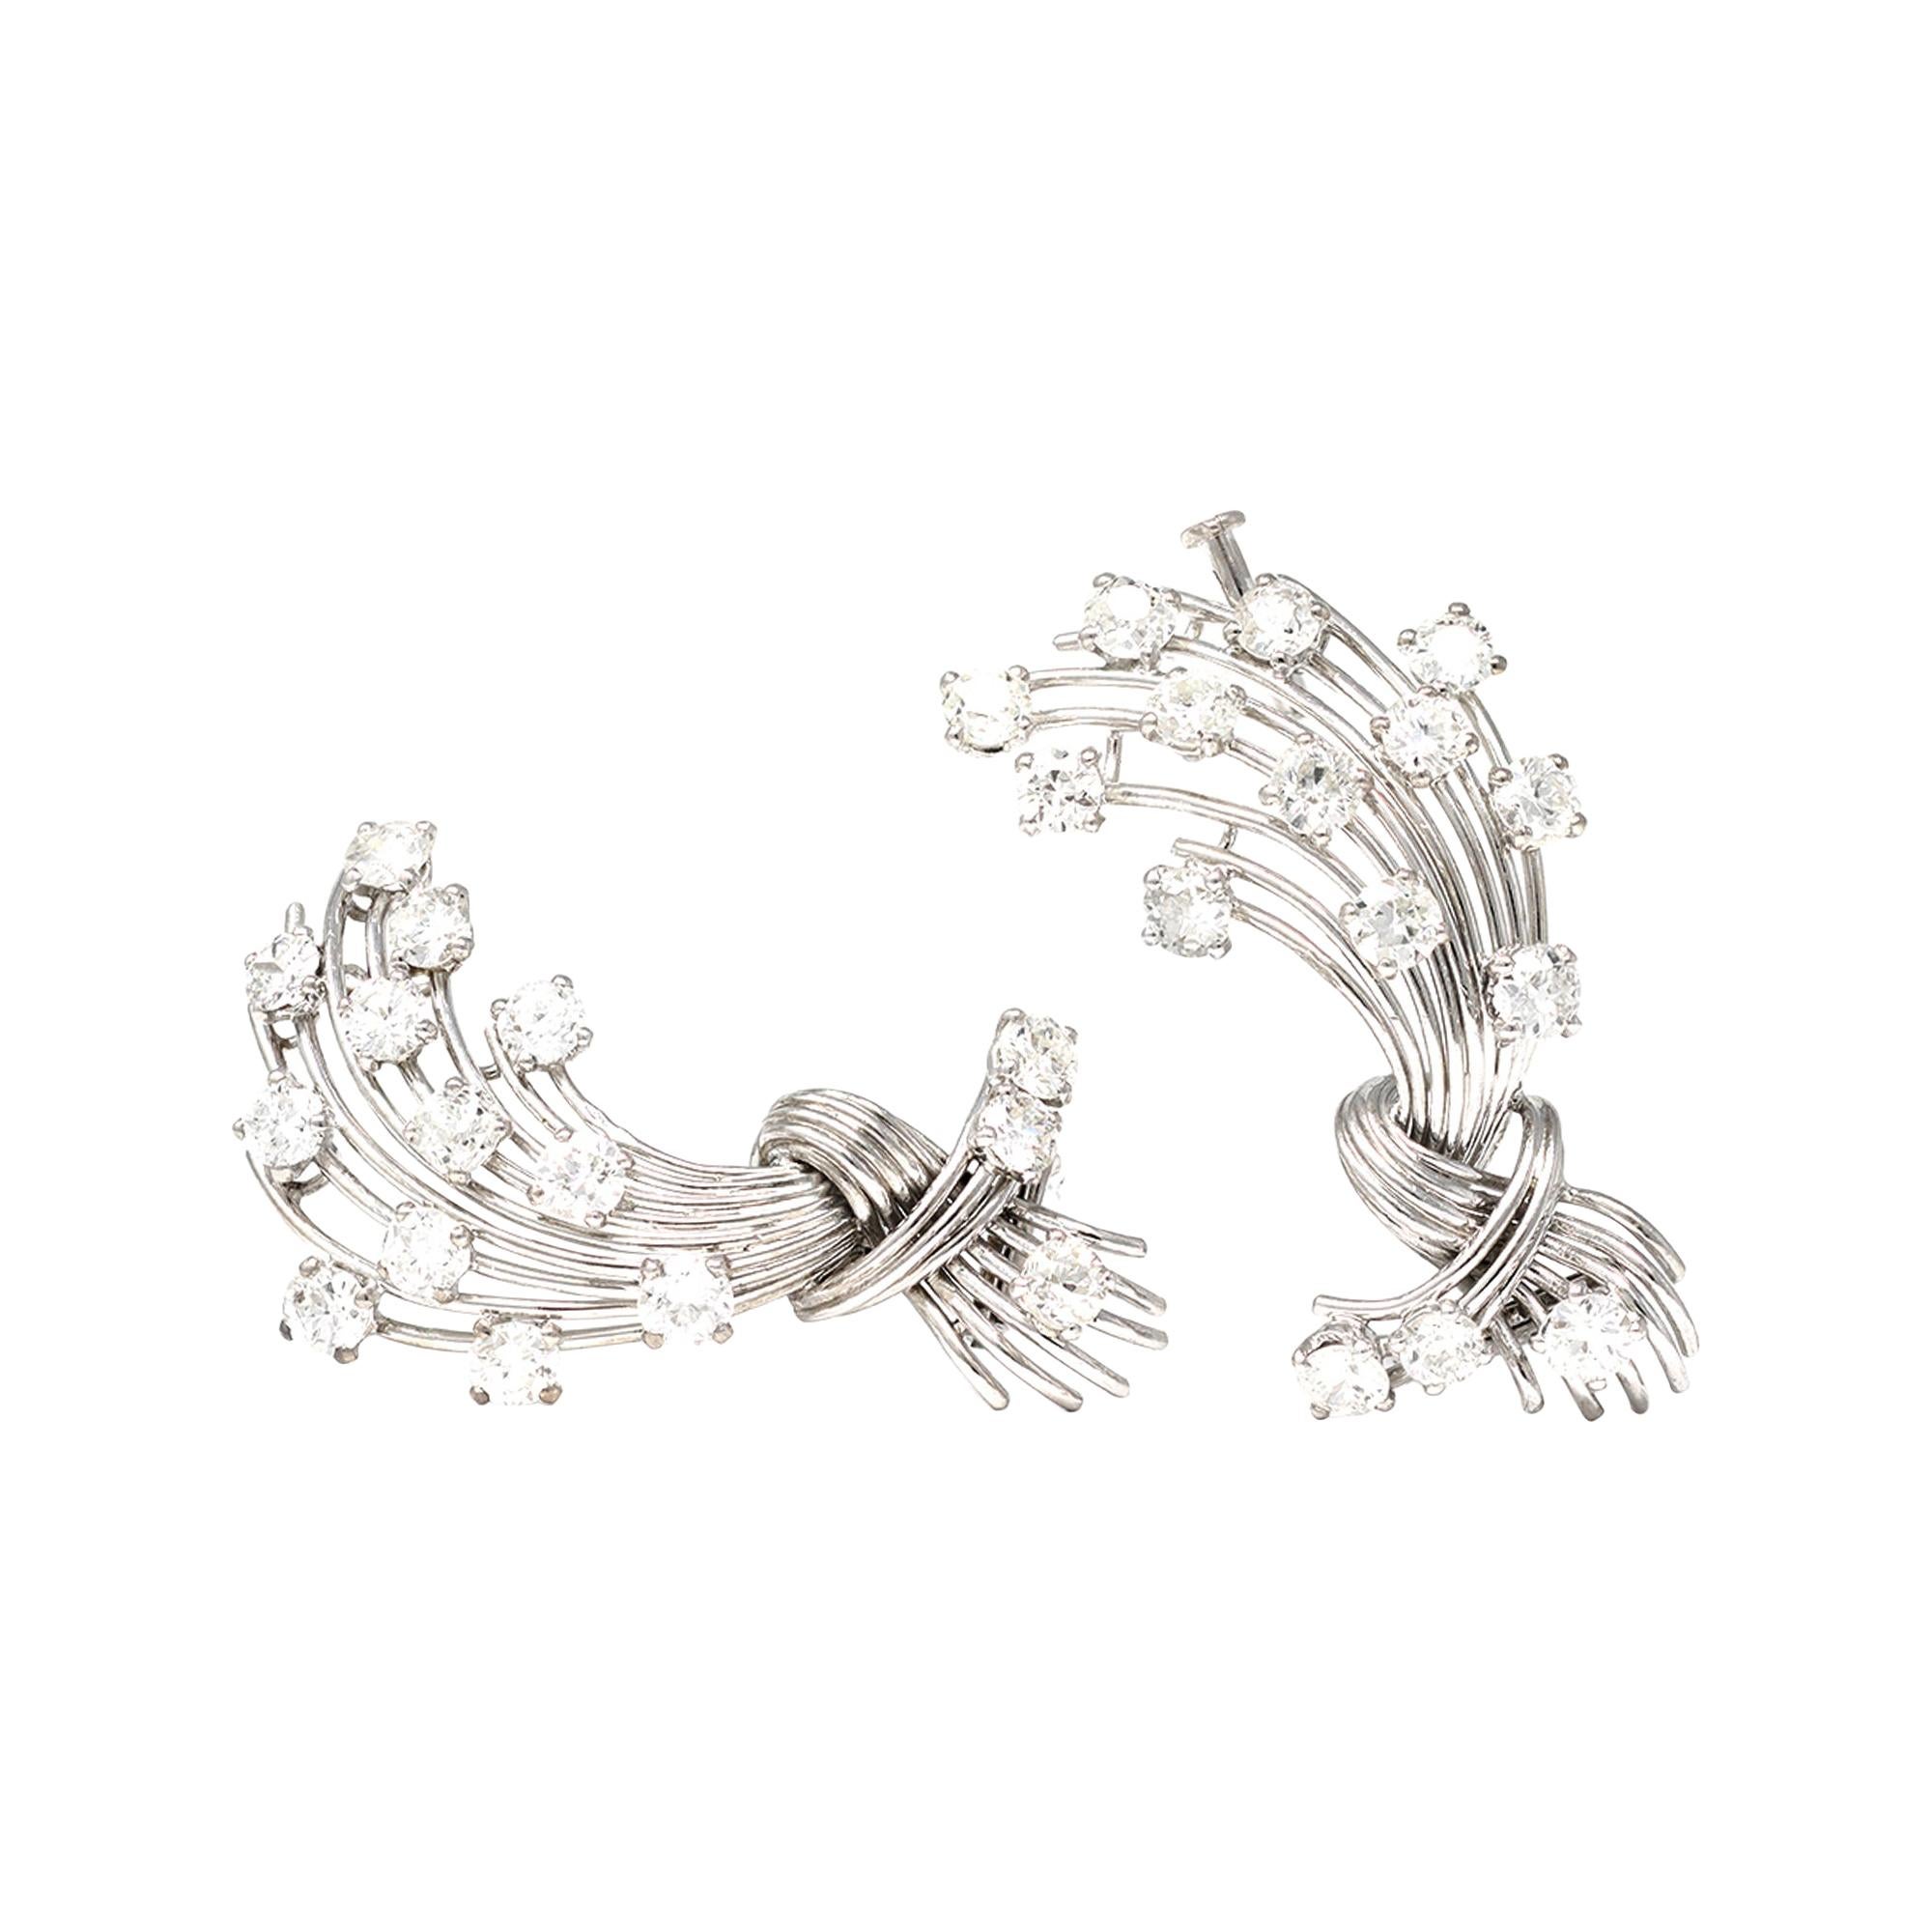 Signed Mauboussin Paris Pair of Clips in Platinum and 18k